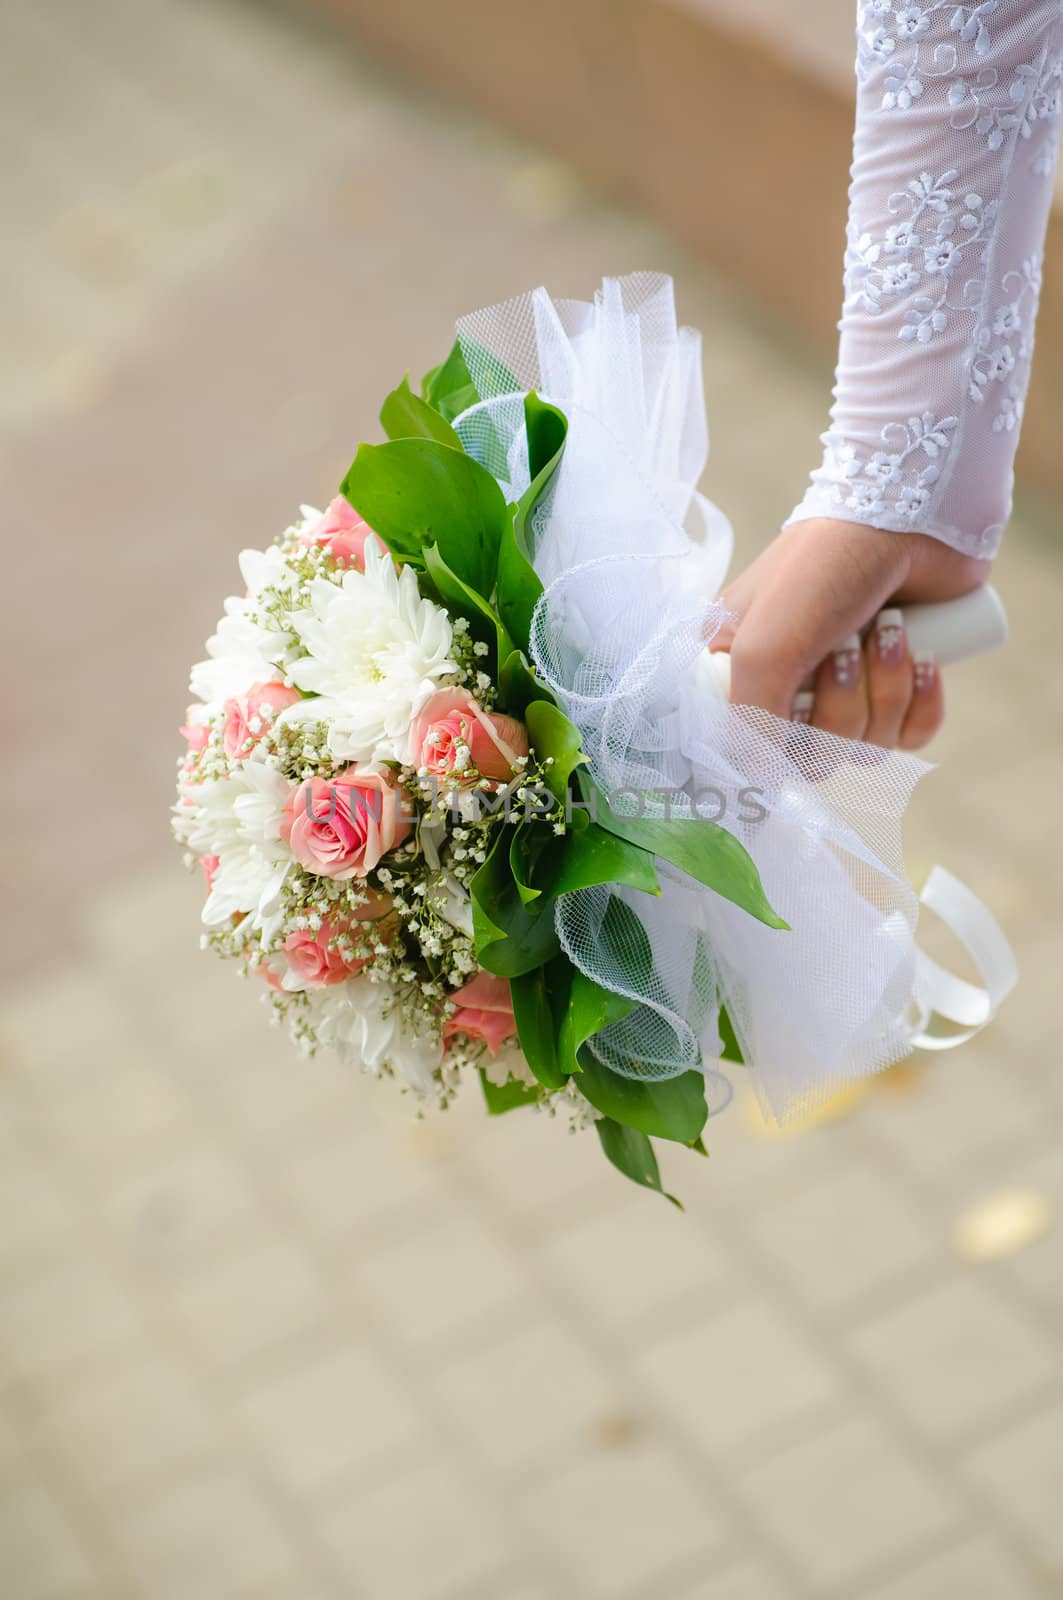 Wedding bouquet in hands of the bride by docer2000